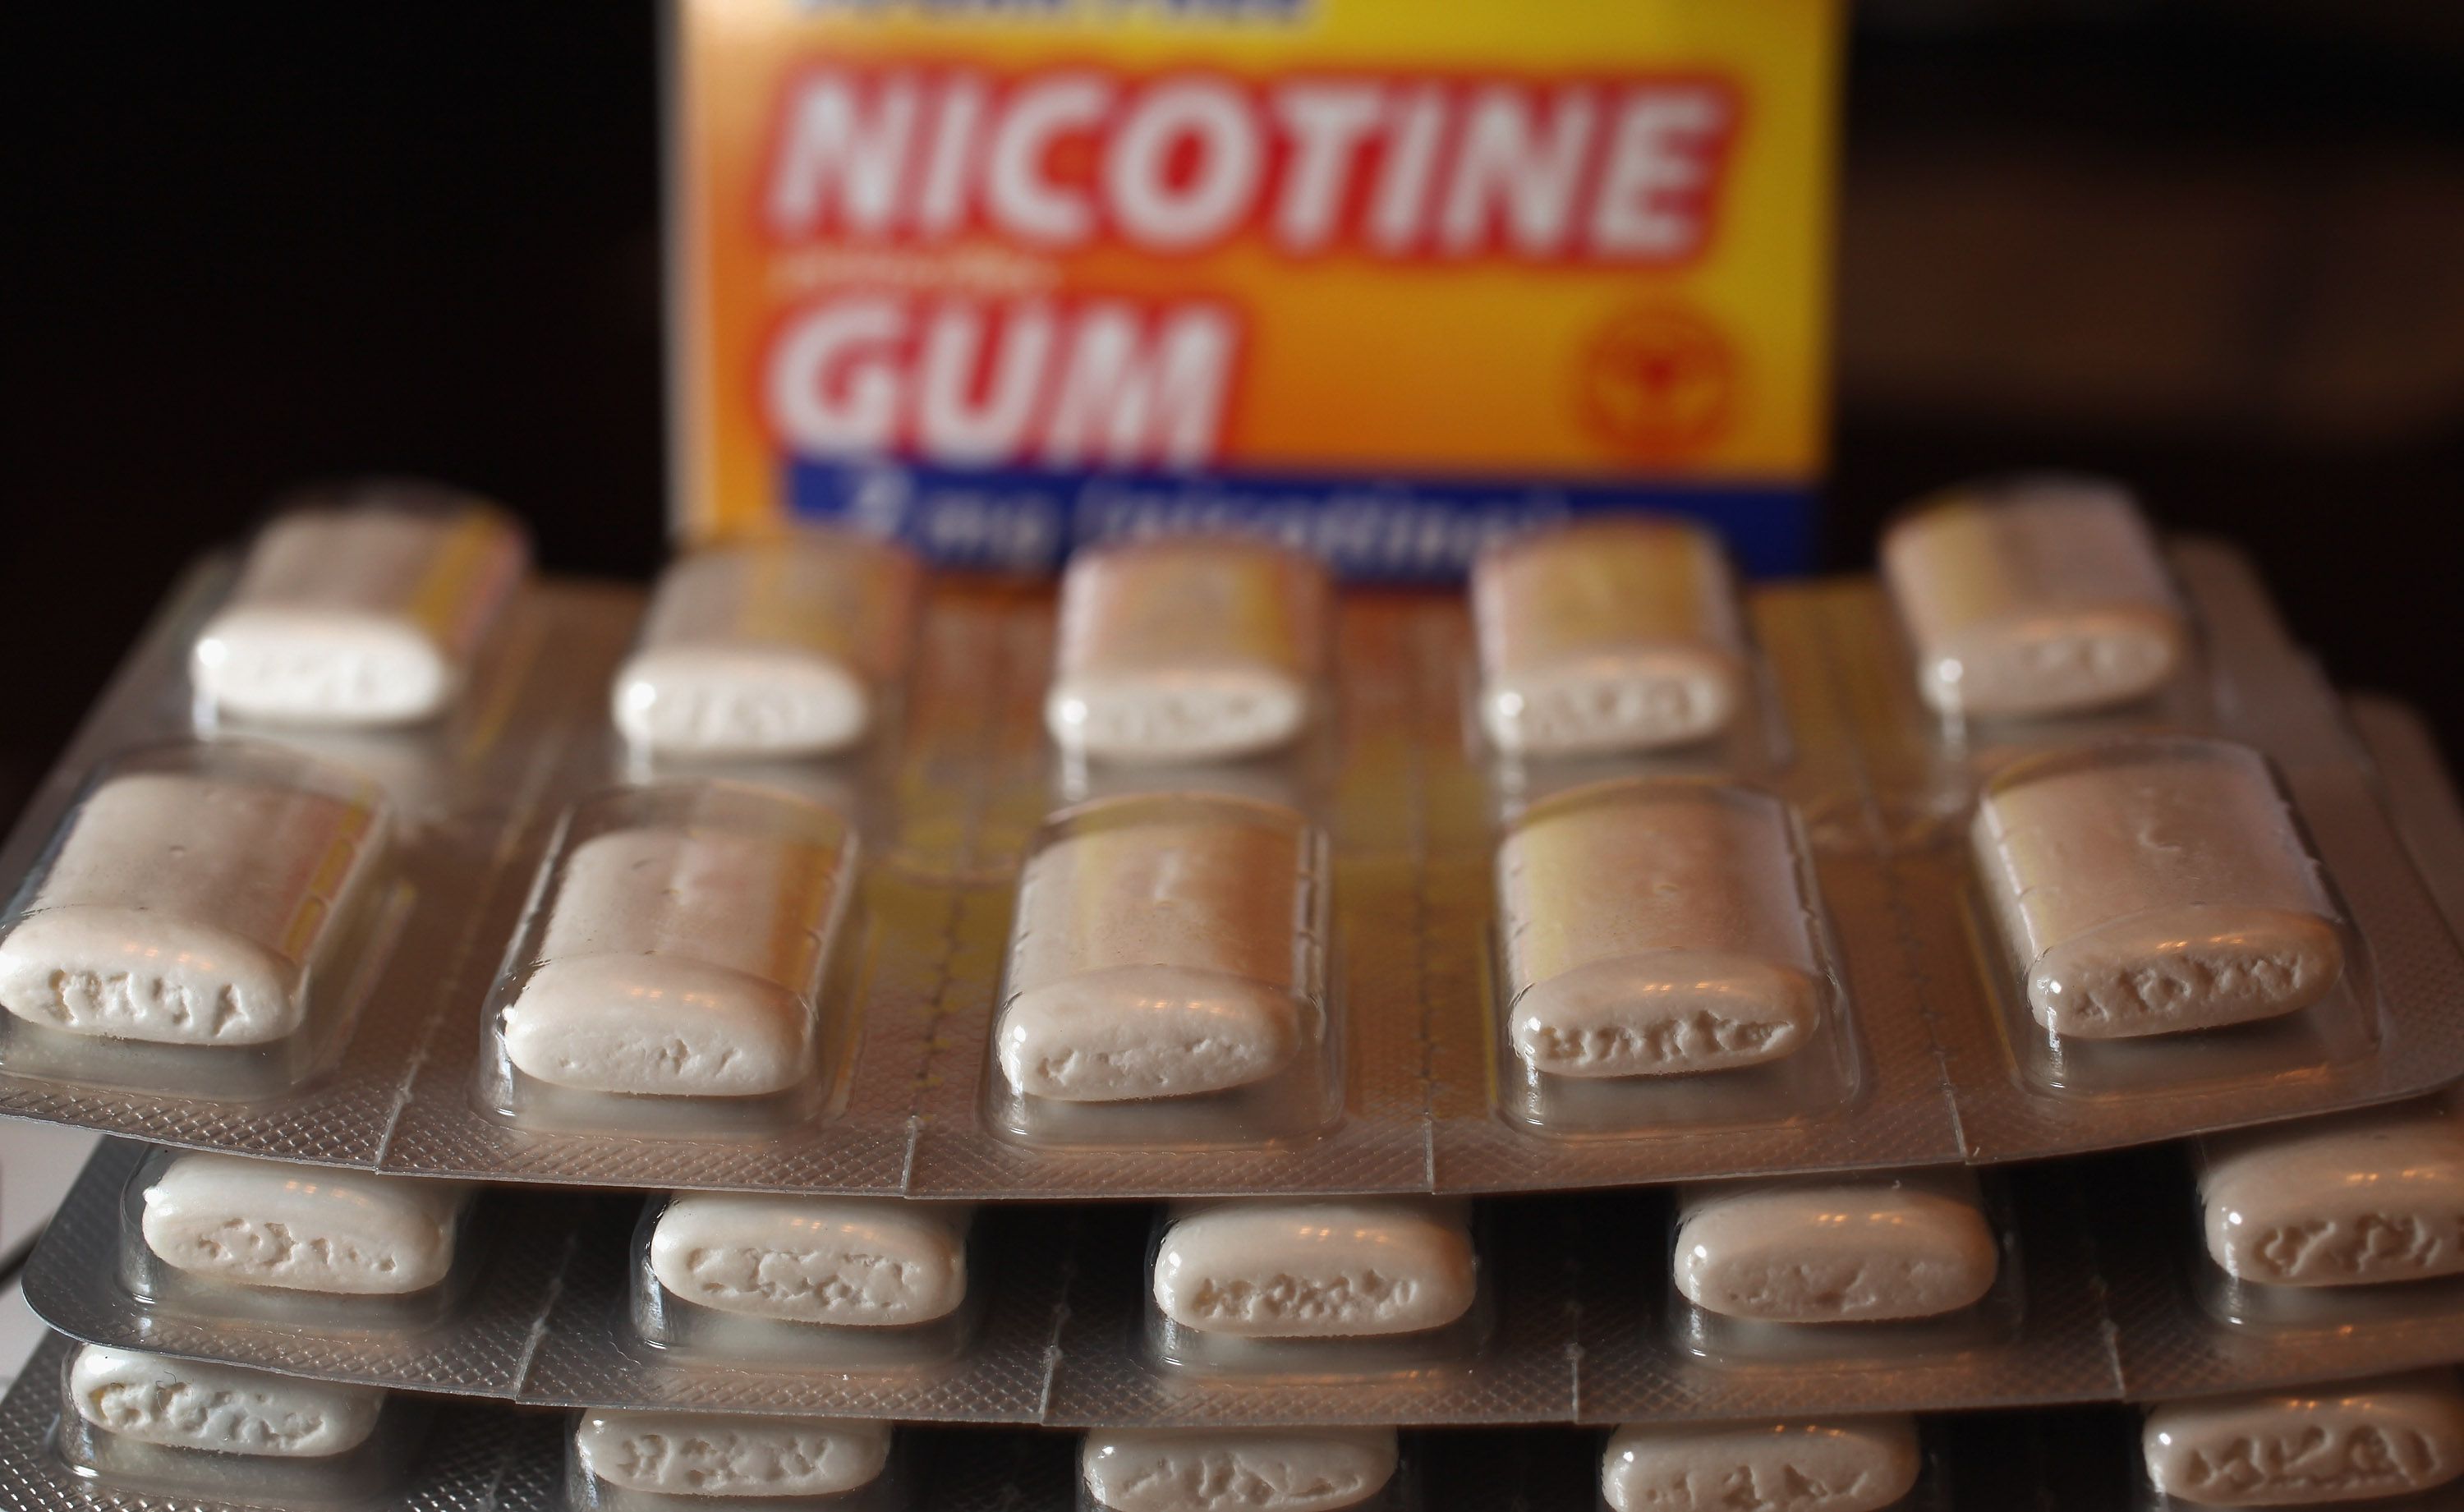 A complete guide to the nicotine patches - Quit Genius